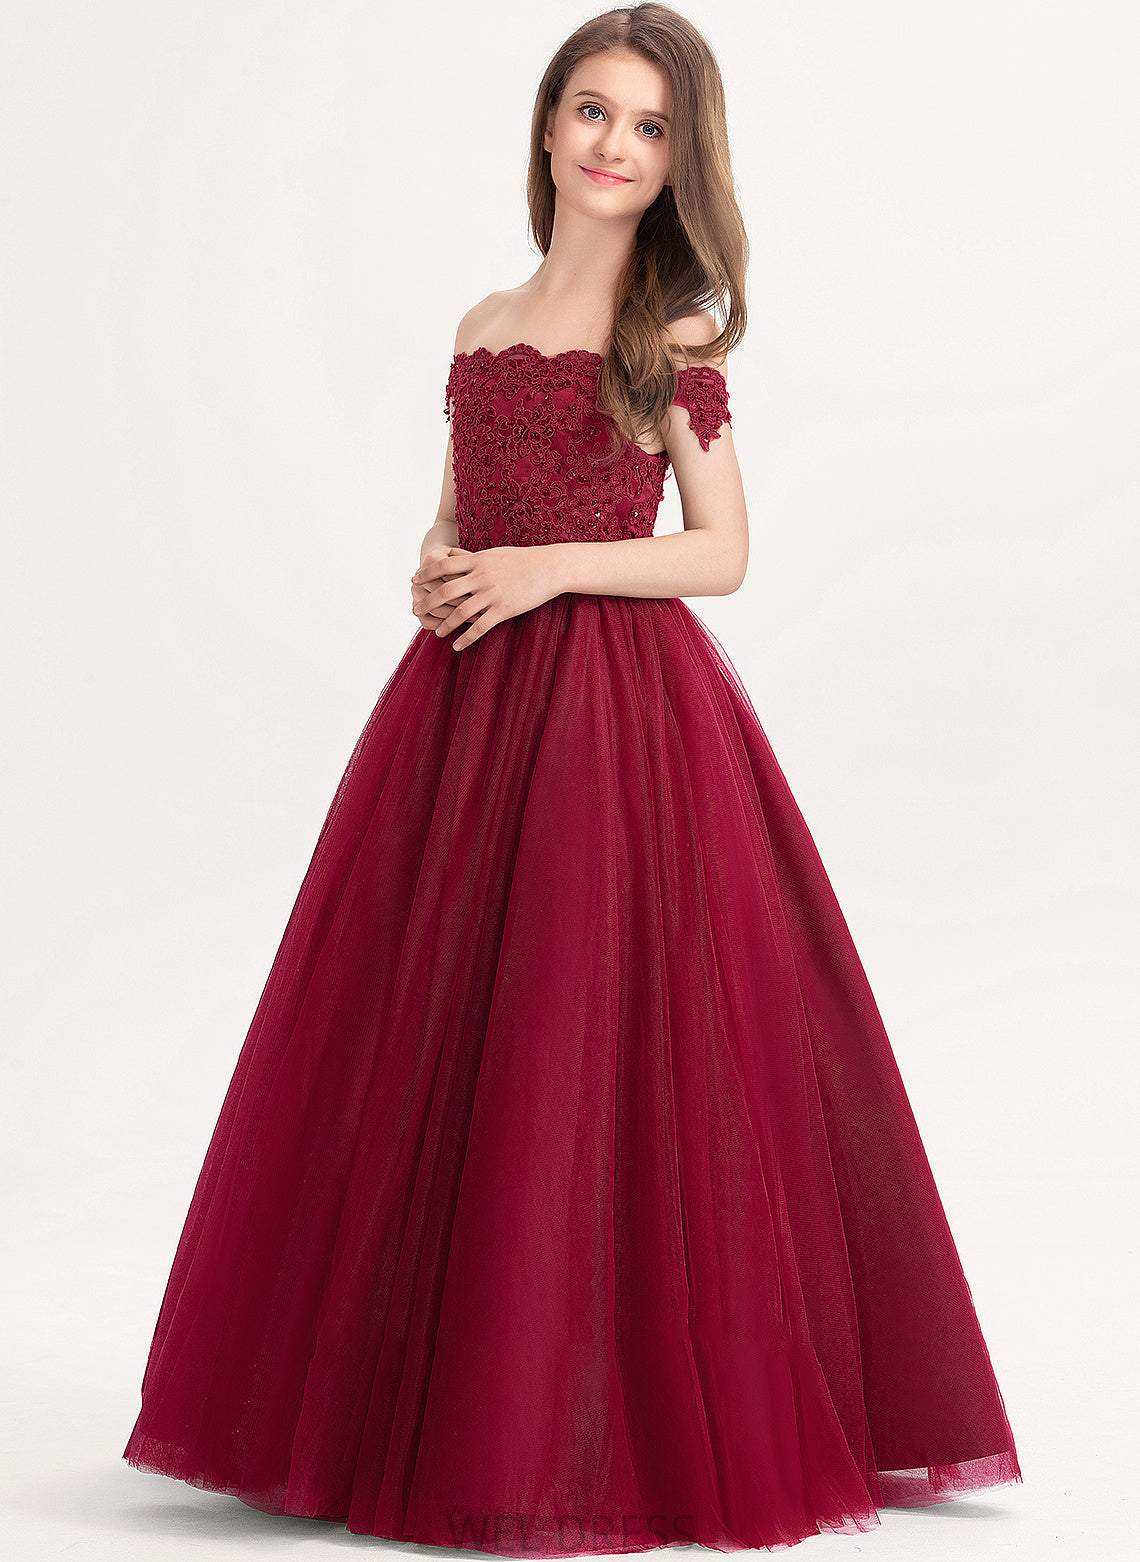 Beading Sequins Lace Ball-Gown/Princess Alyssa Tulle Junior Bridesmaid Dresses Floor-Length With Off-the-Shoulder